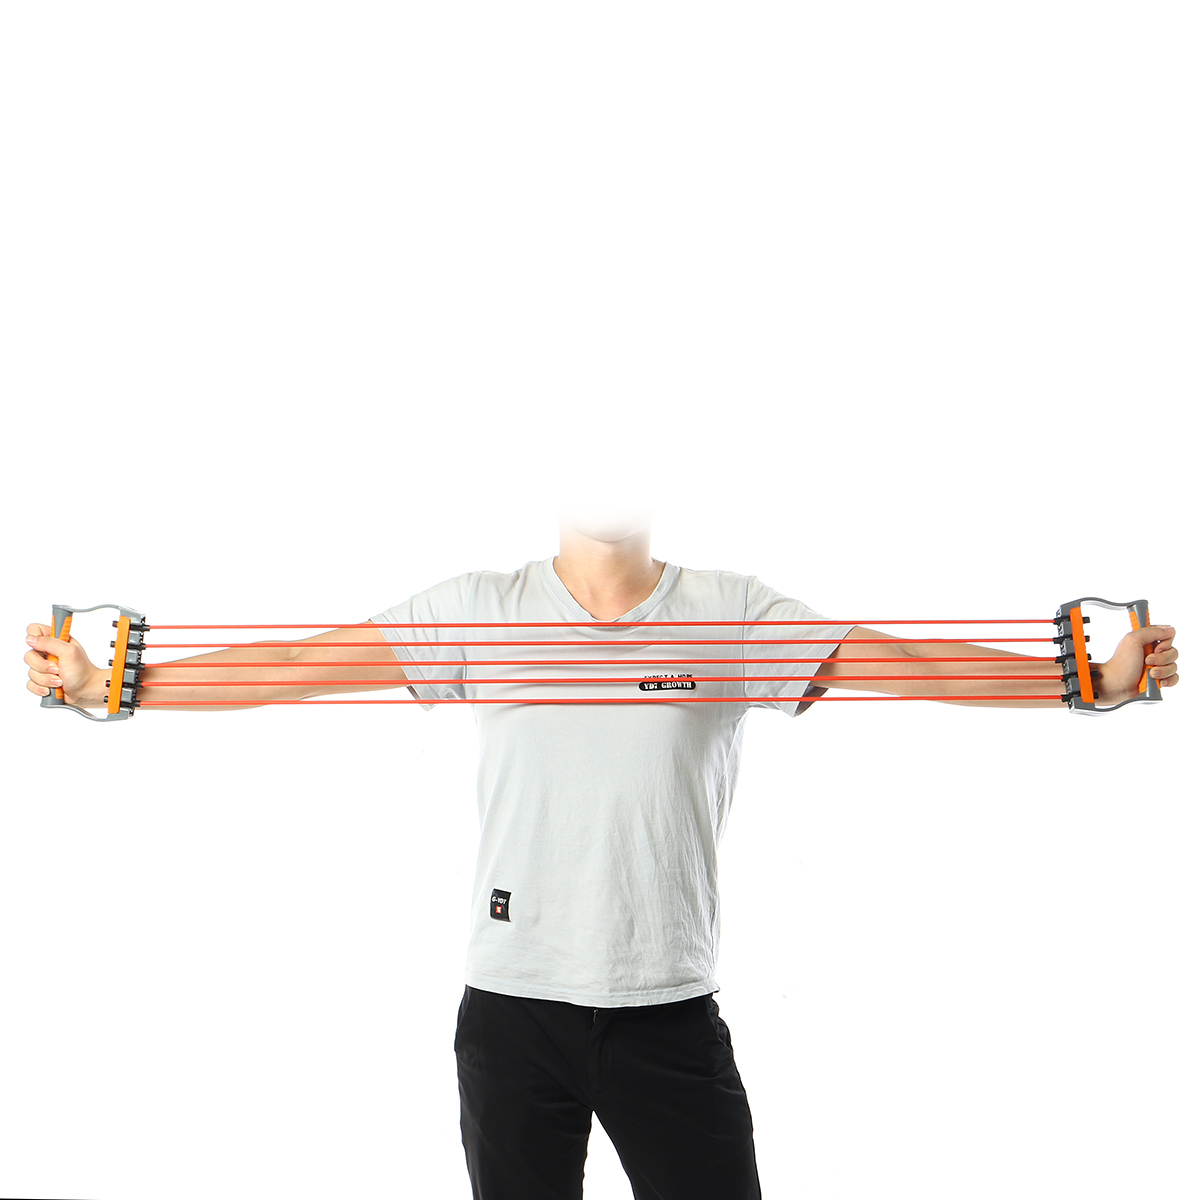 5-Tube-Fitness-Chest-Expander-Resistance-Bands-Arm-Pull-Bar-Fitness-Training-Exercise-Tools-1686609-7